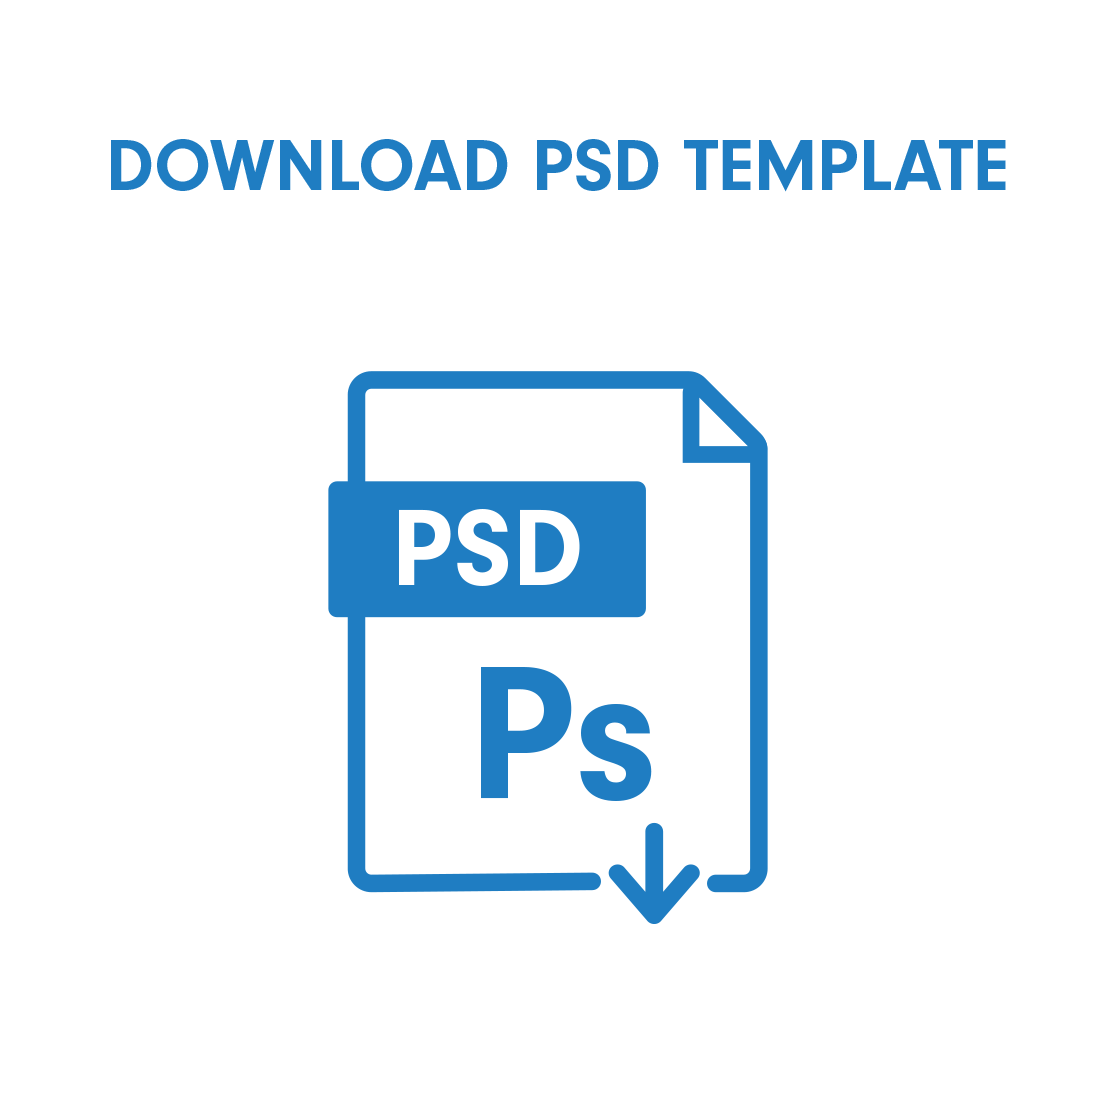 https://www.uspress.com/app_themes/us-press-e2/assets/images/pages/downloadtemplatetrifoldpsd.png